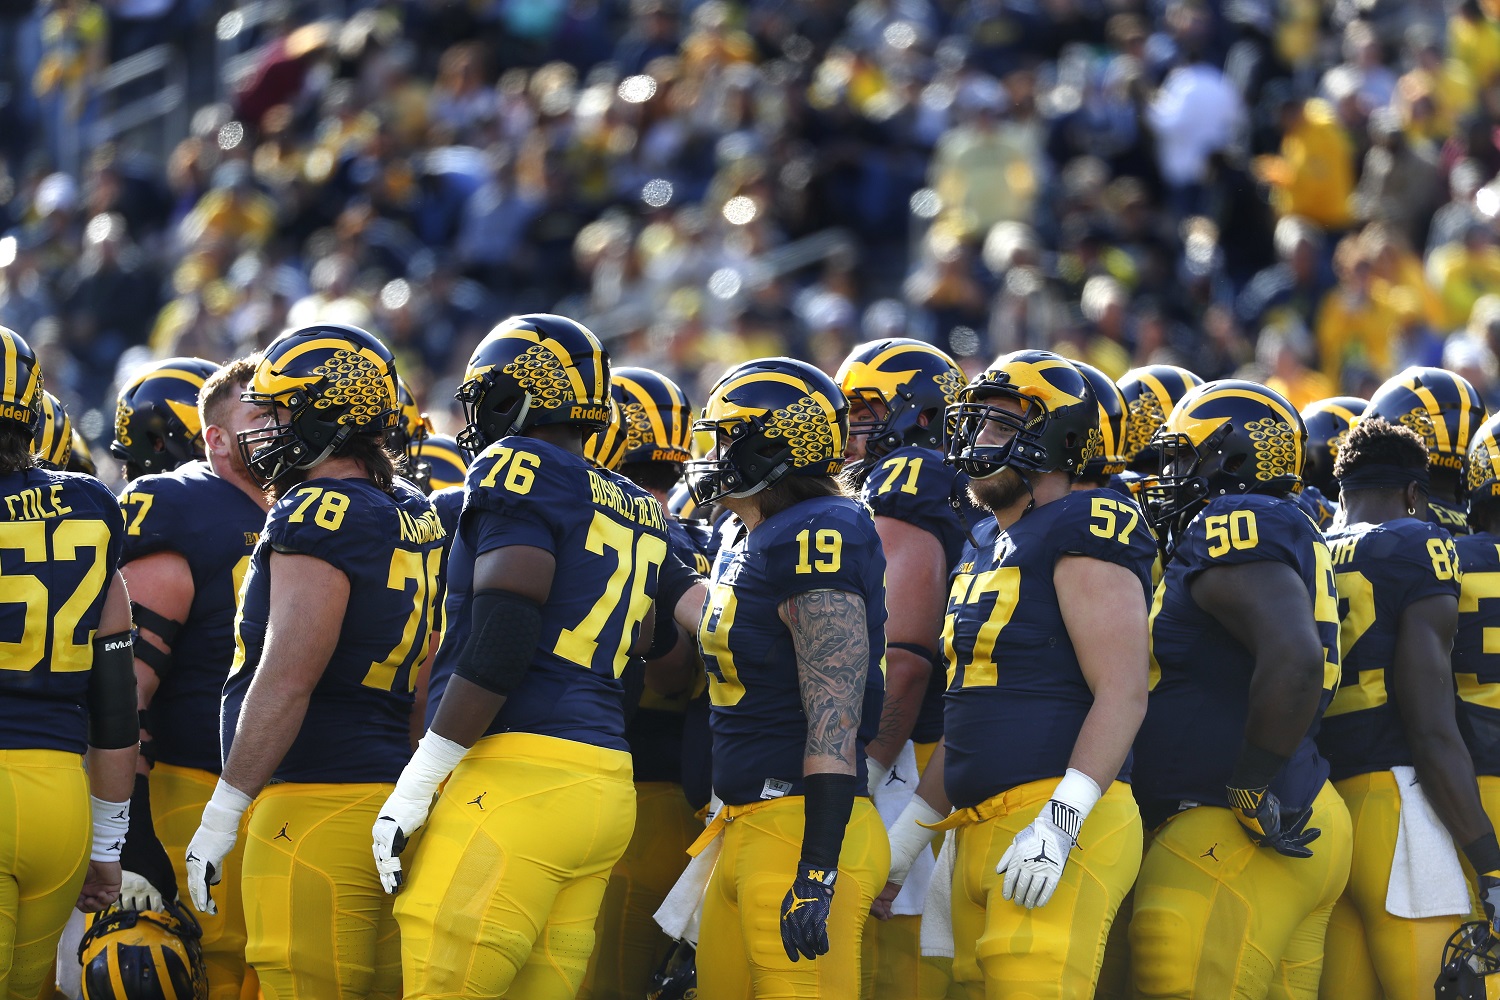 Michigan Wolverines huddle during an NCAA college football game against the Maryland Terrapins in Ann Arbor, Mich., Saturday, Nov. 5, 2016. (AP Photo/Paul Sancya)